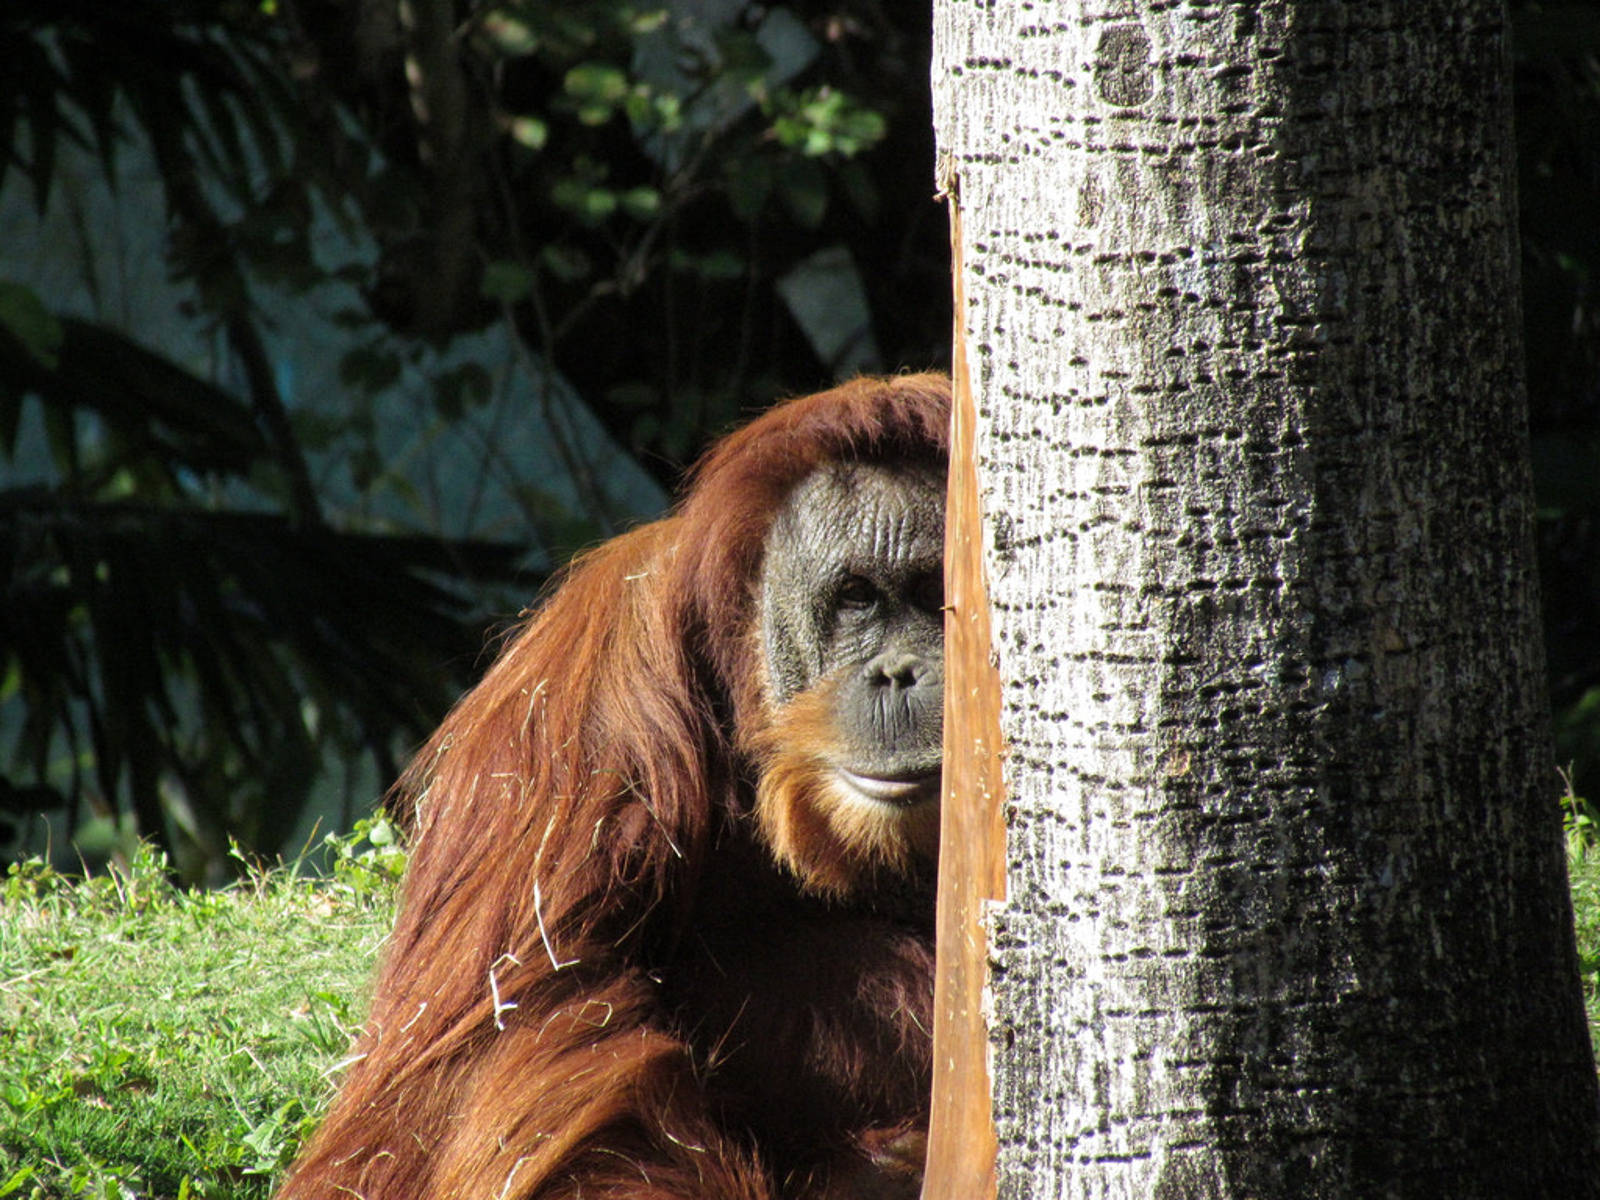 Can the Sumatra's Wildlife Recover from the Impacts of Dirty Palm Oil?